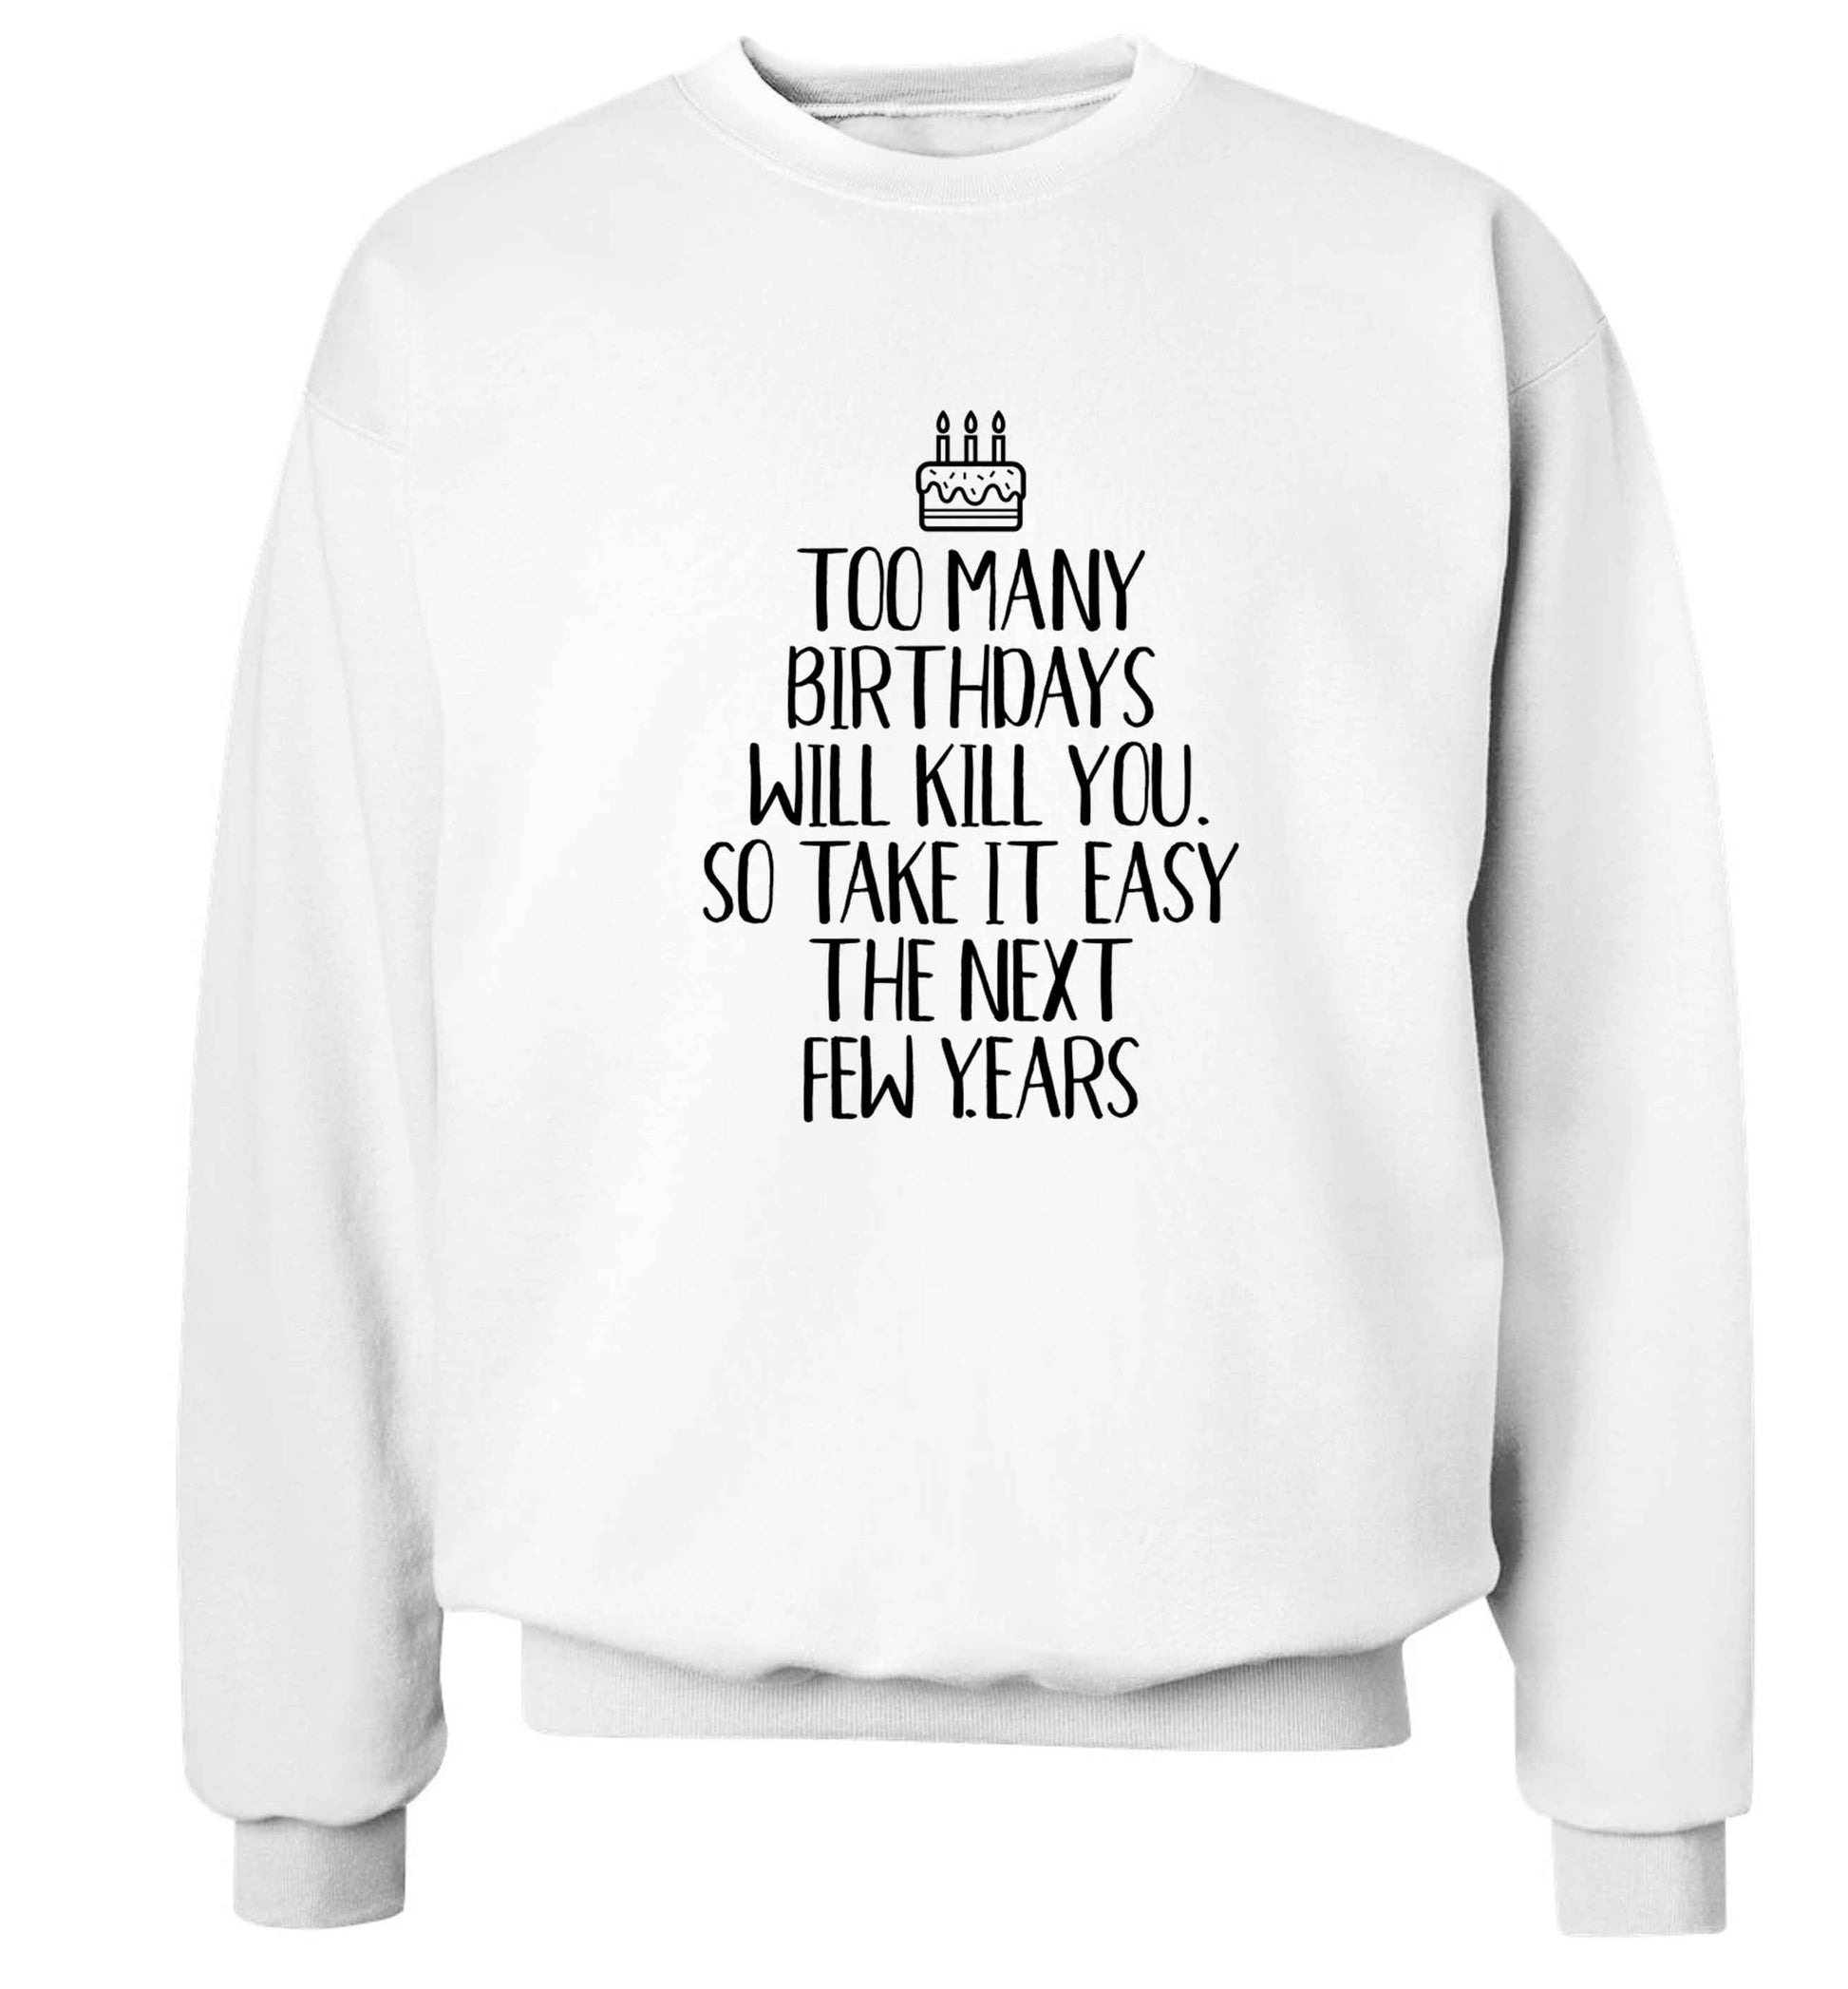 Too many birthdays will kill you so take it easy Adult's unisex white Sweater 2XL